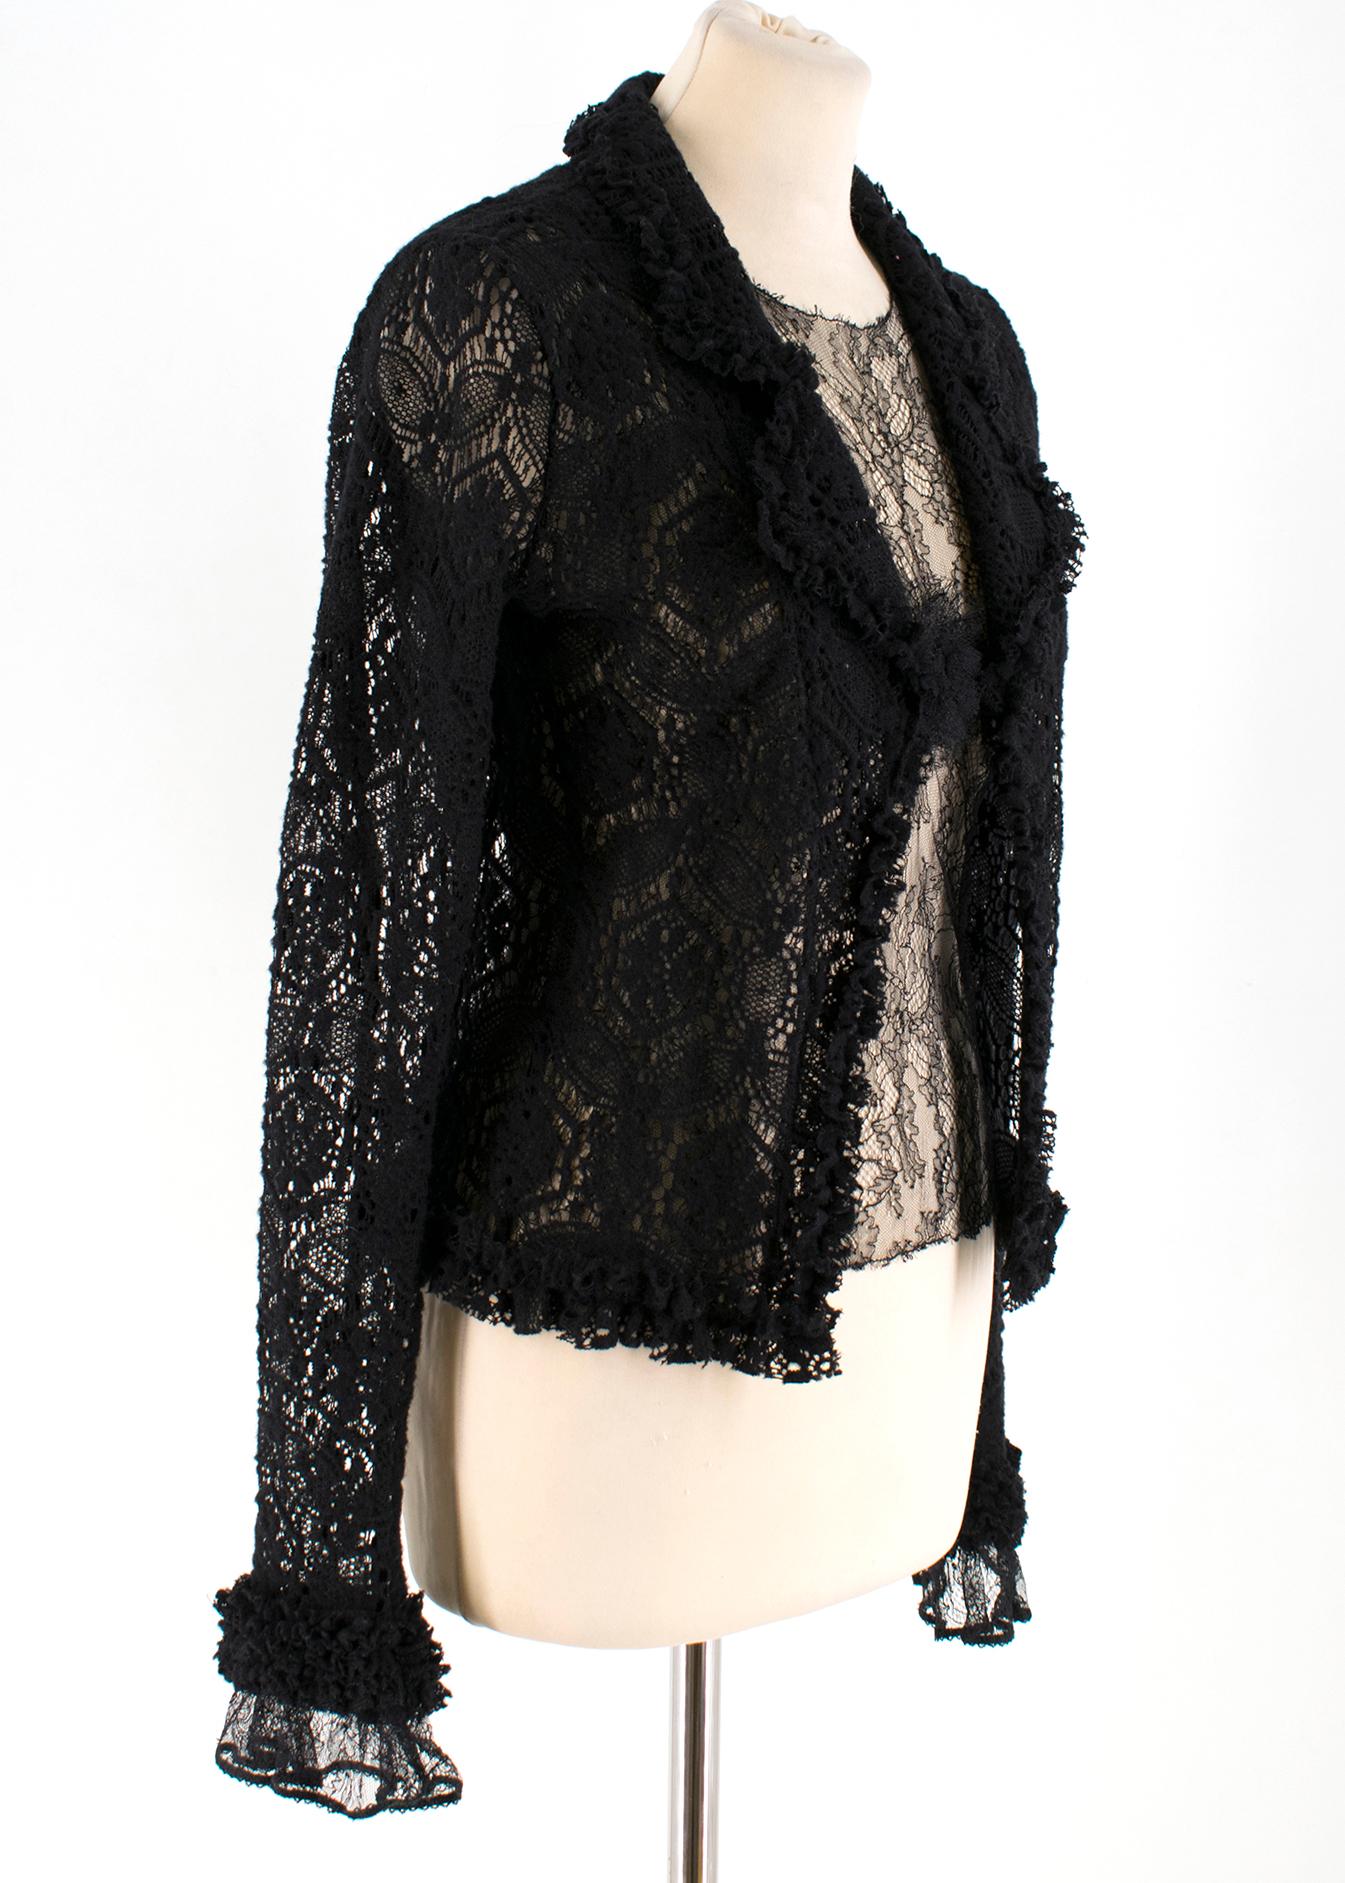 Chanel Black Laced Vest Top & Cardigan Set 

Vest Top
- Black Laced Vest top 
- Round neck, sleeveless 
- Signature flower at center 
- Unlined, see through
- Lightweight

Cardigan 
- Black Crochet cardigan 
- Soft point lapel 
- Ruffled trim hems